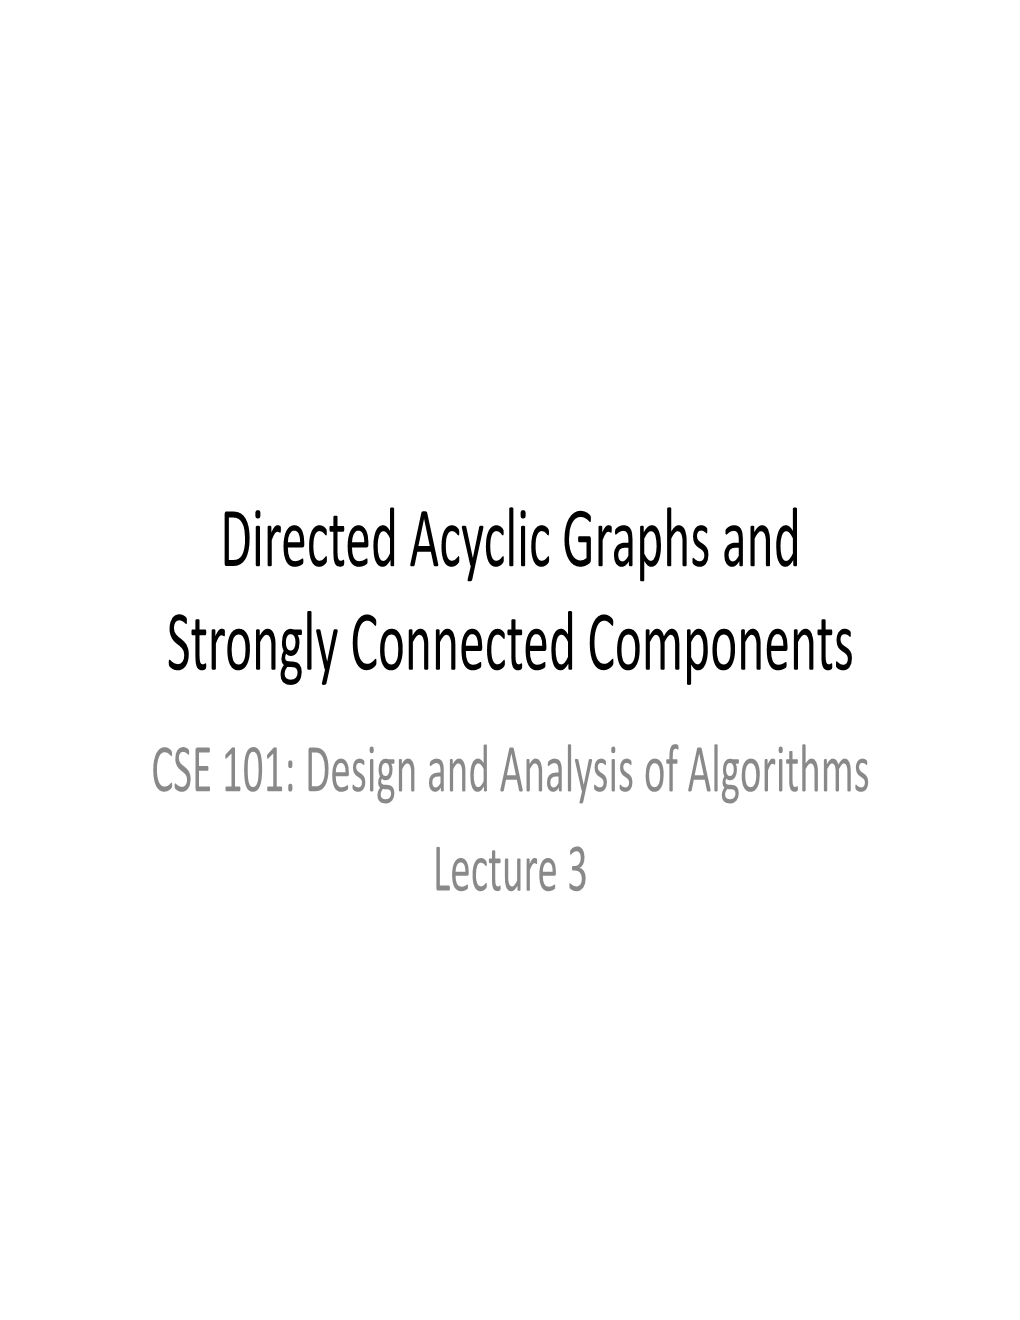 Directed Acyclic Graphs and Strongly Connected Components CSE 101: Design and Analysis of Algorithms Lecture 3 CSE 101: Design and Analysis of Algorithms